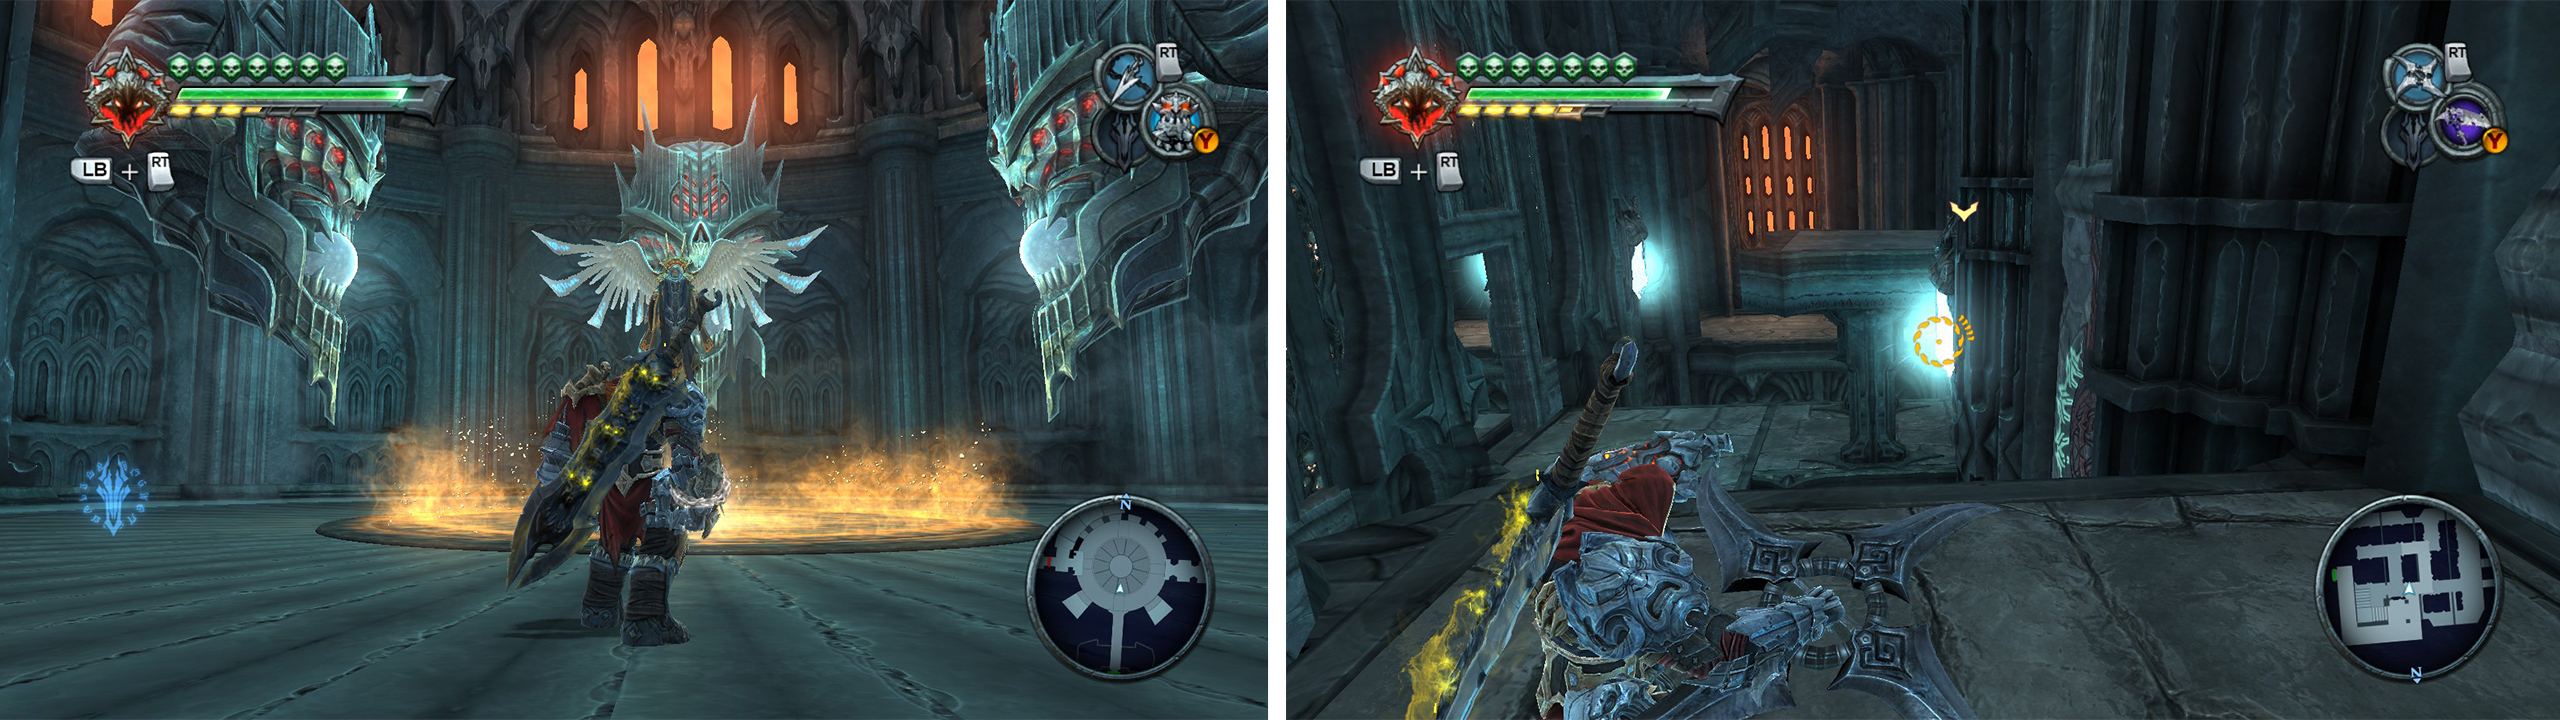 Speak with Azrael (left). In the first room manipulate the crystals to work your way through the room (right).